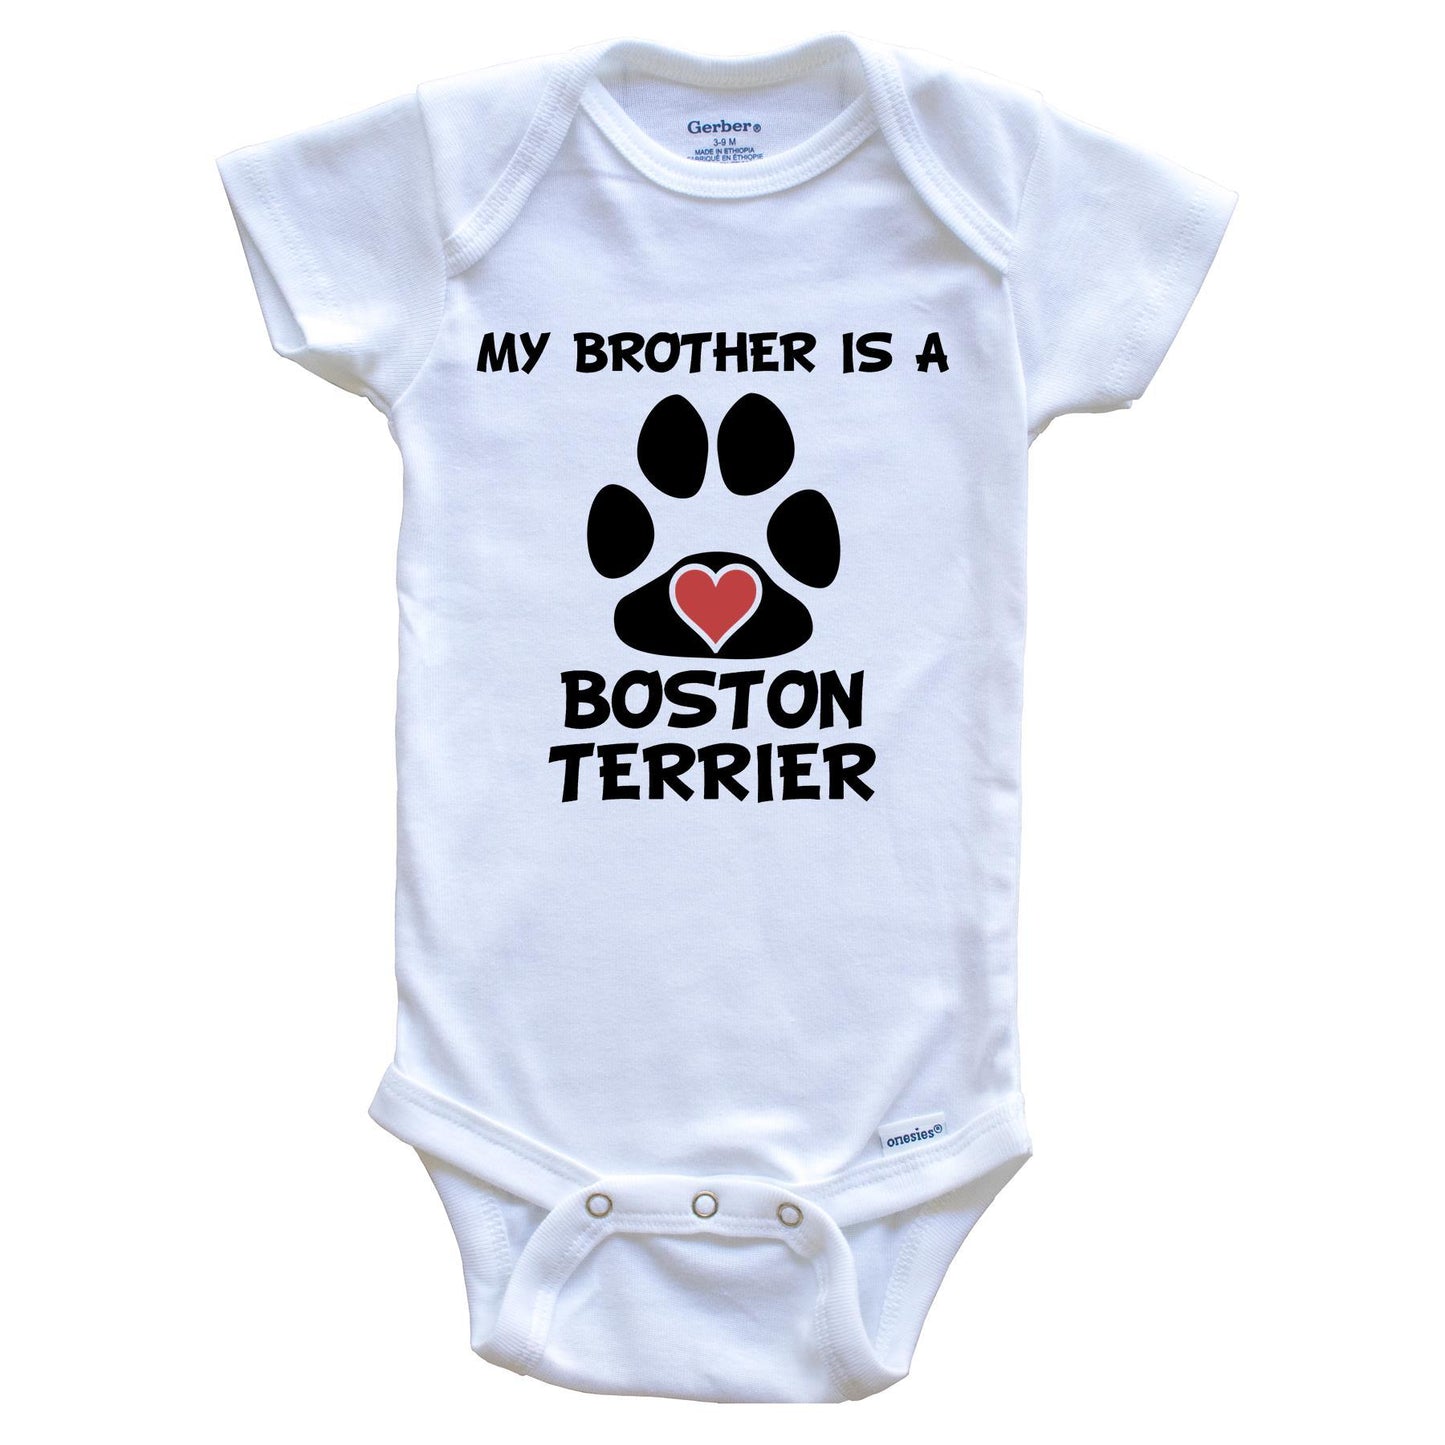 My Brother Is A Boston Terrier Baby Onesie